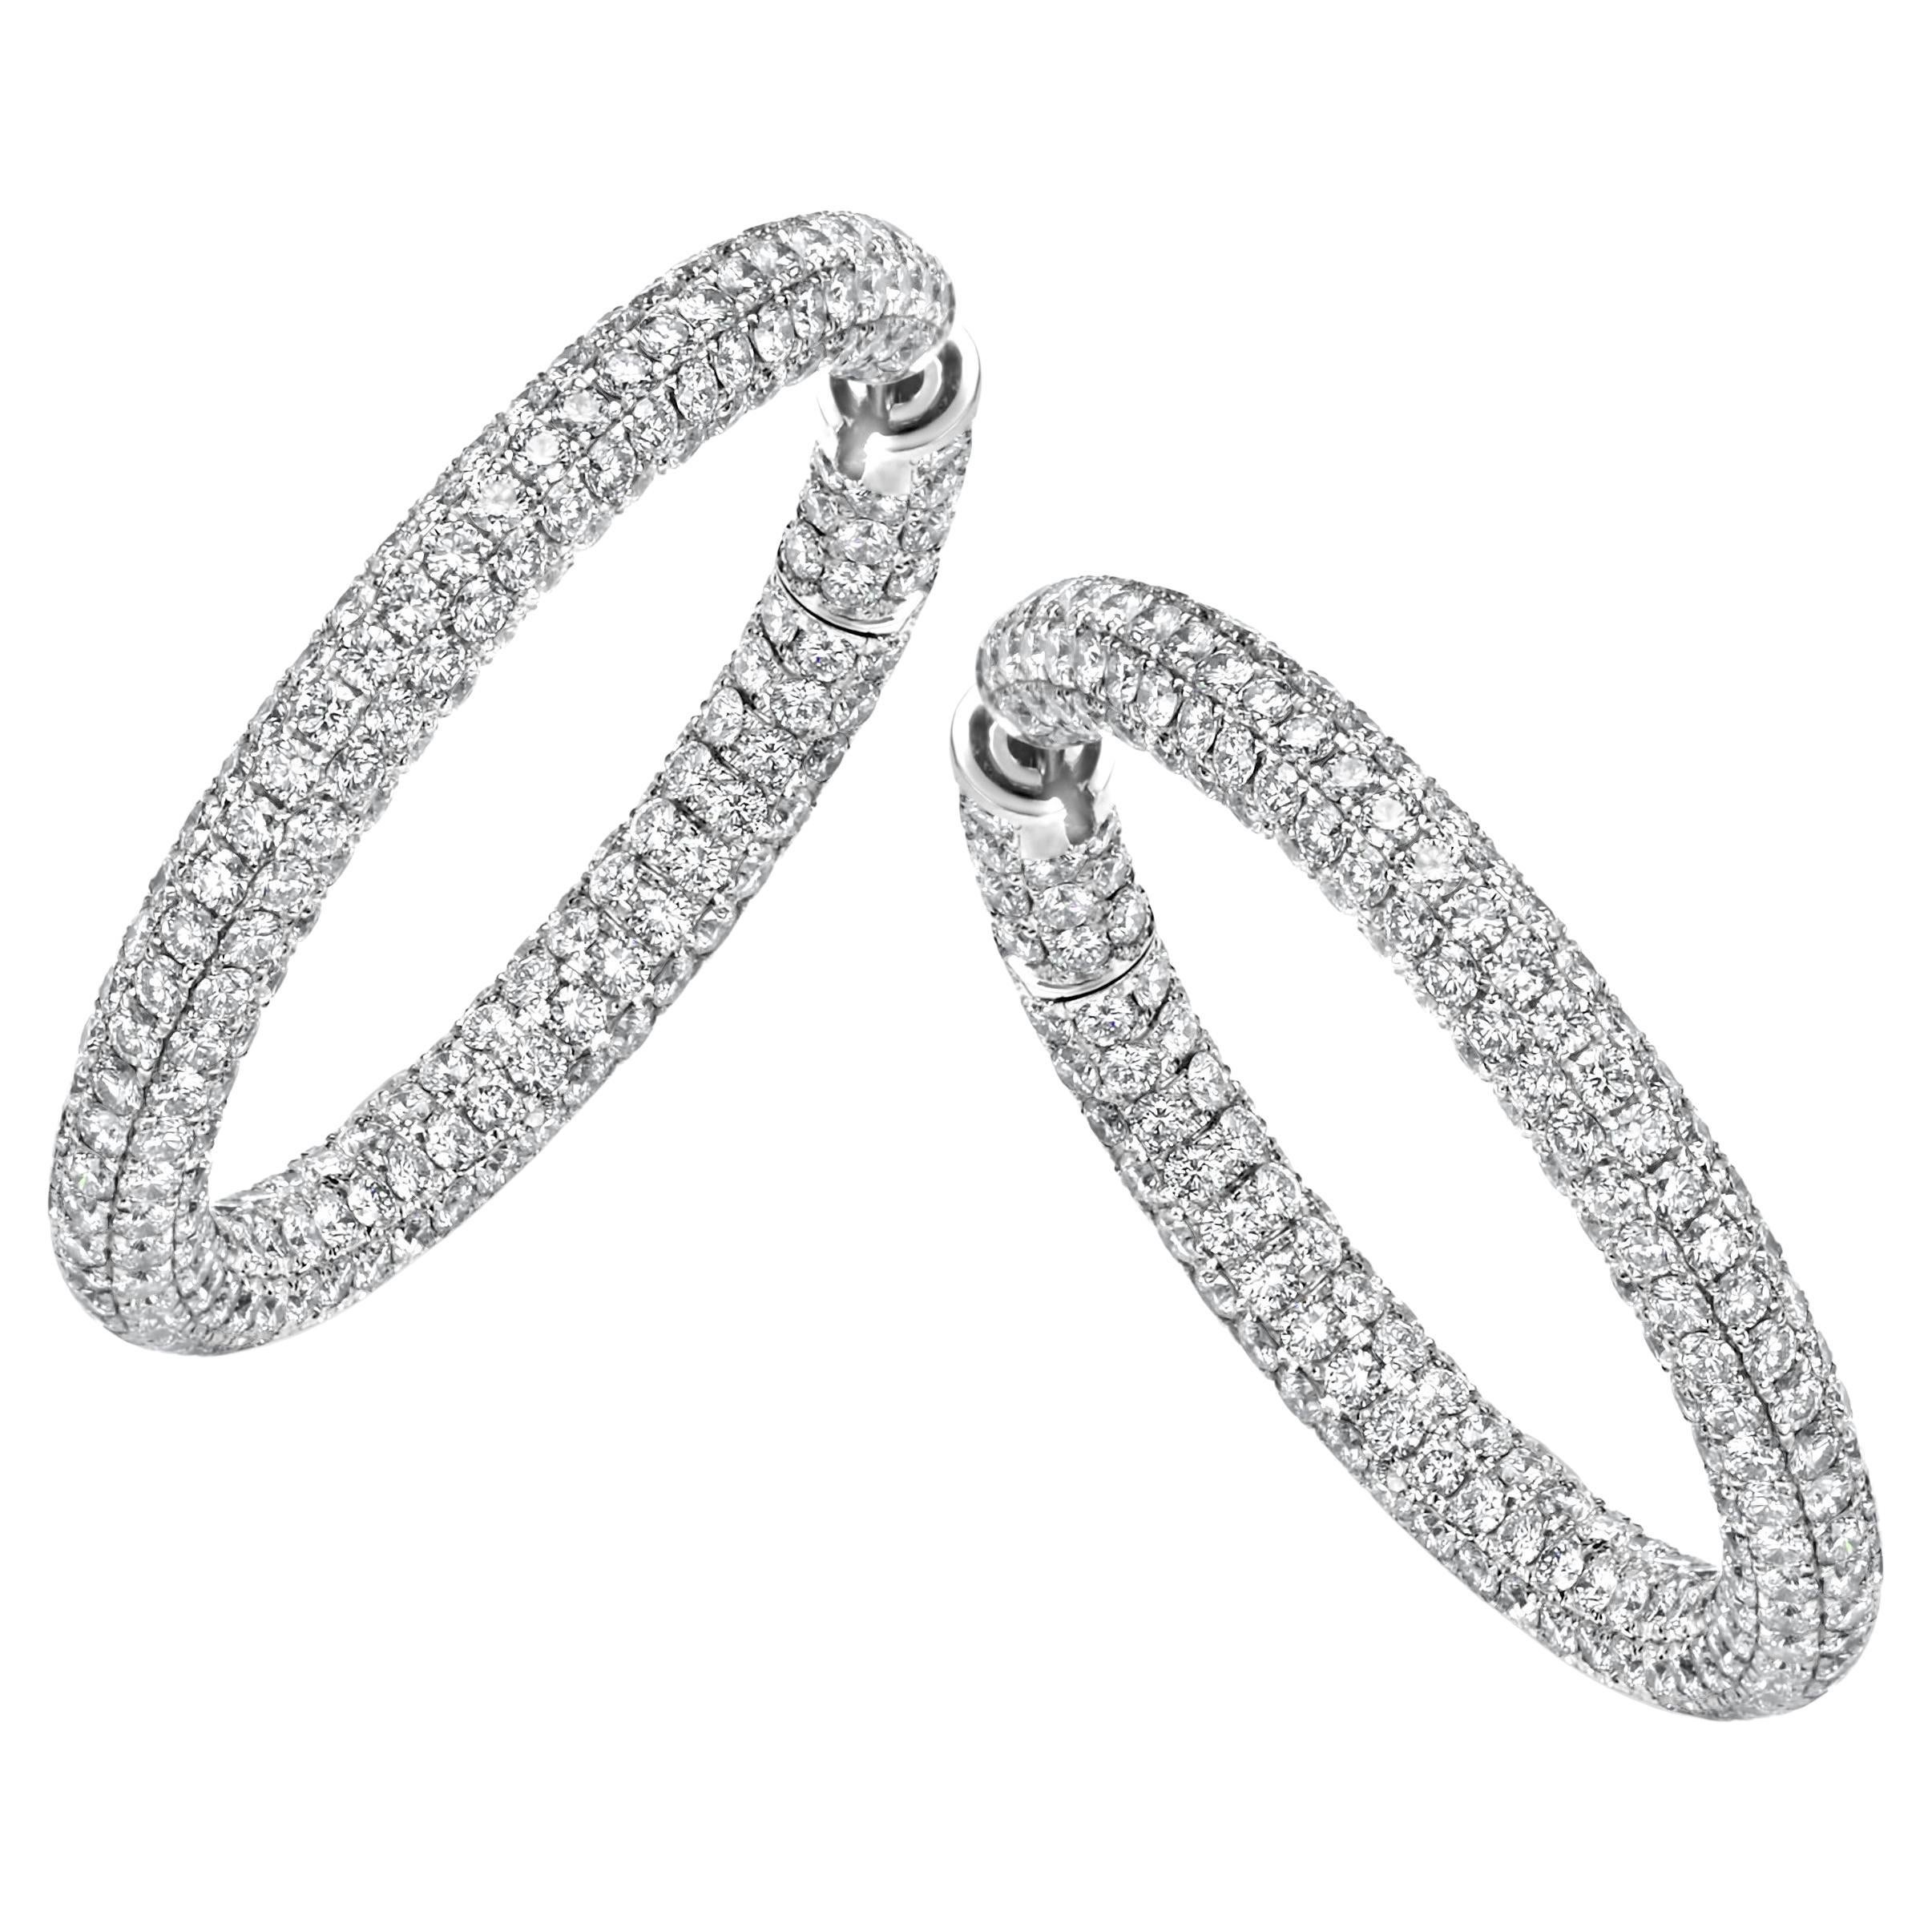 Magnificent 18 Karat White Gold Hoop Earrings with 22.6 Carat Diamonds For Sale